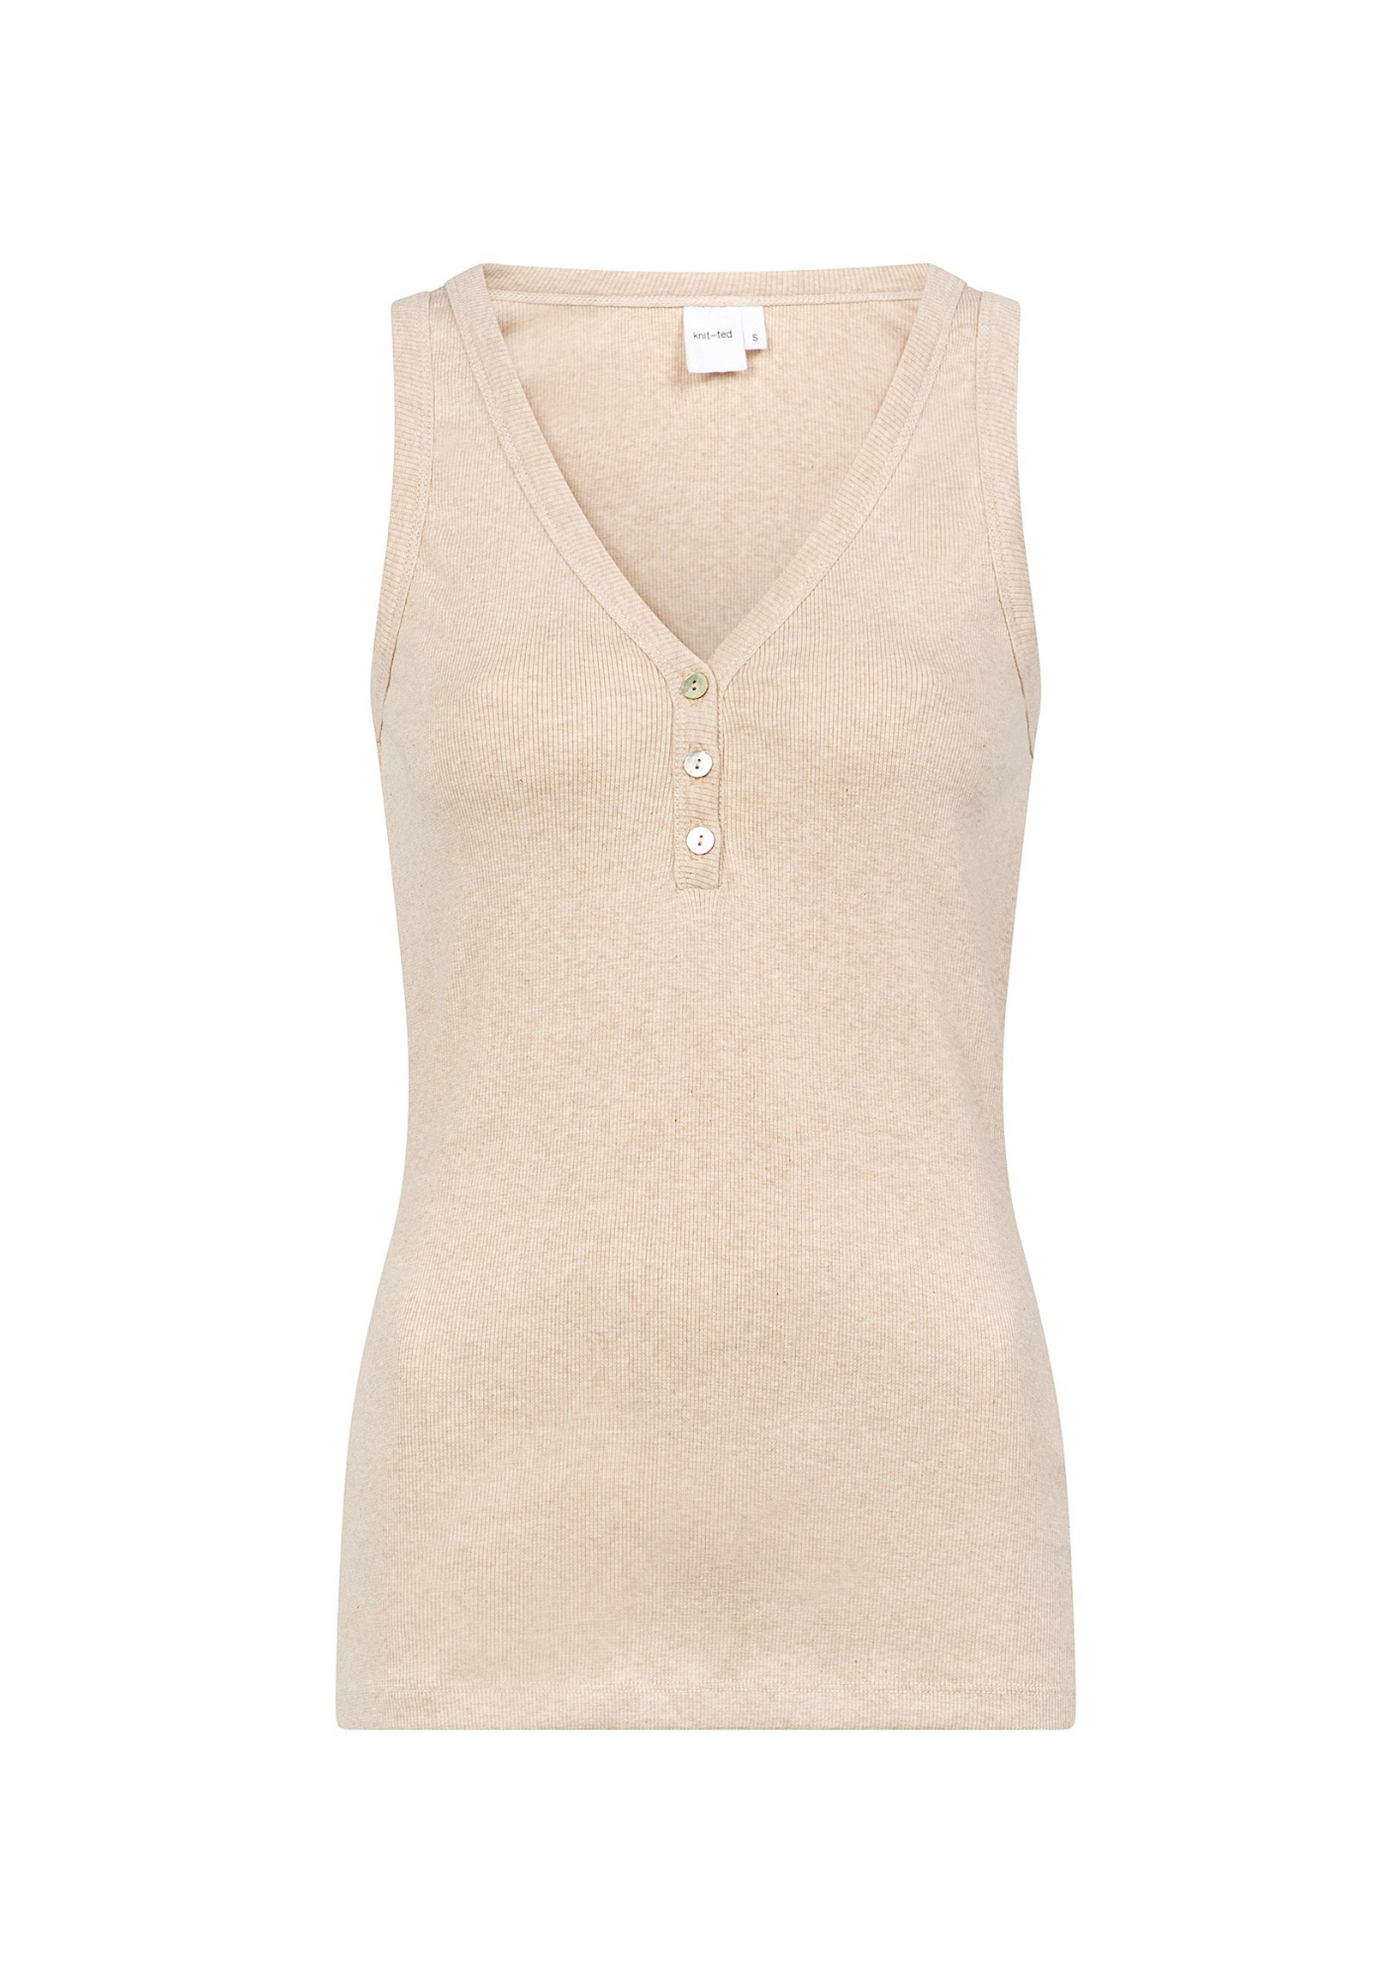 Knit-ted | Tilly Top Sand